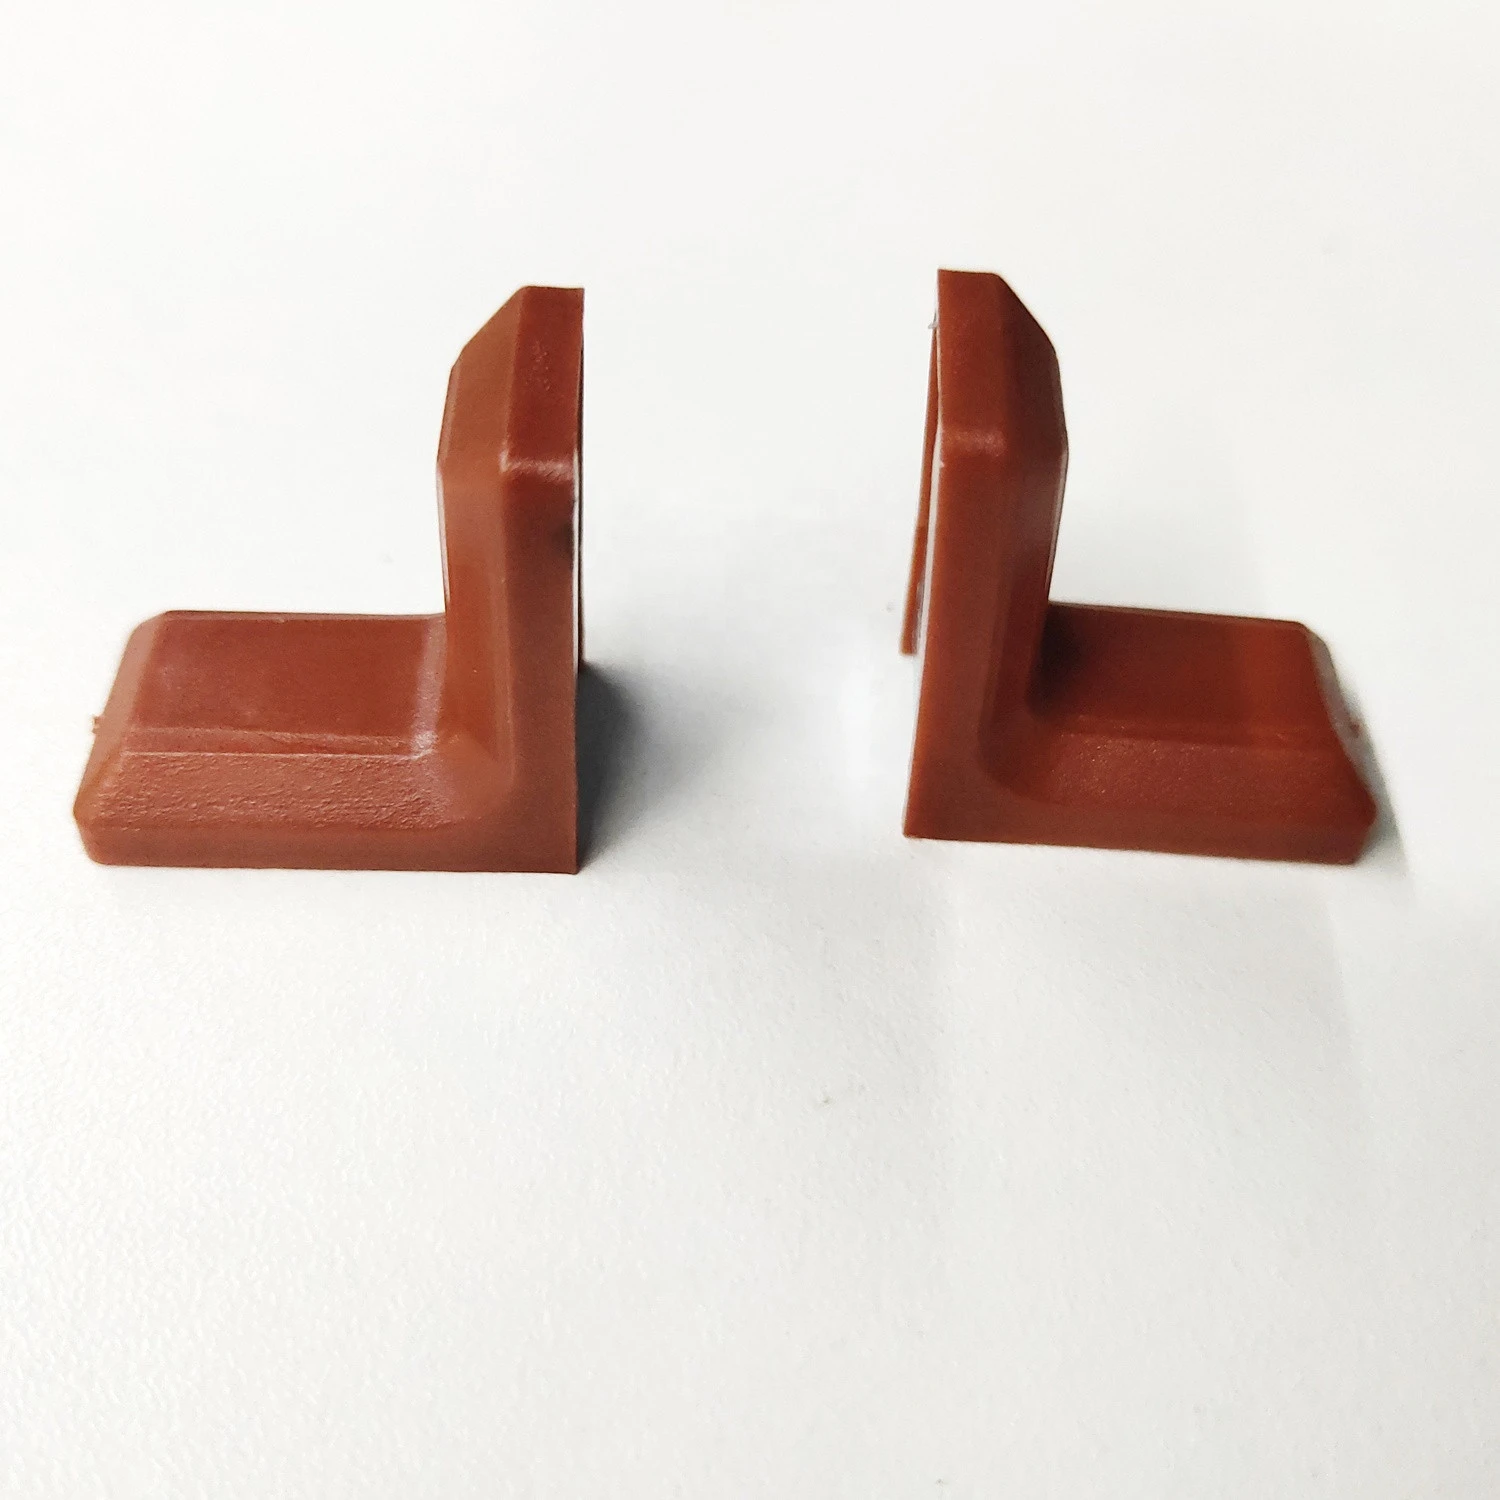 90 degree metal angle brackets for wood furniture corner connector